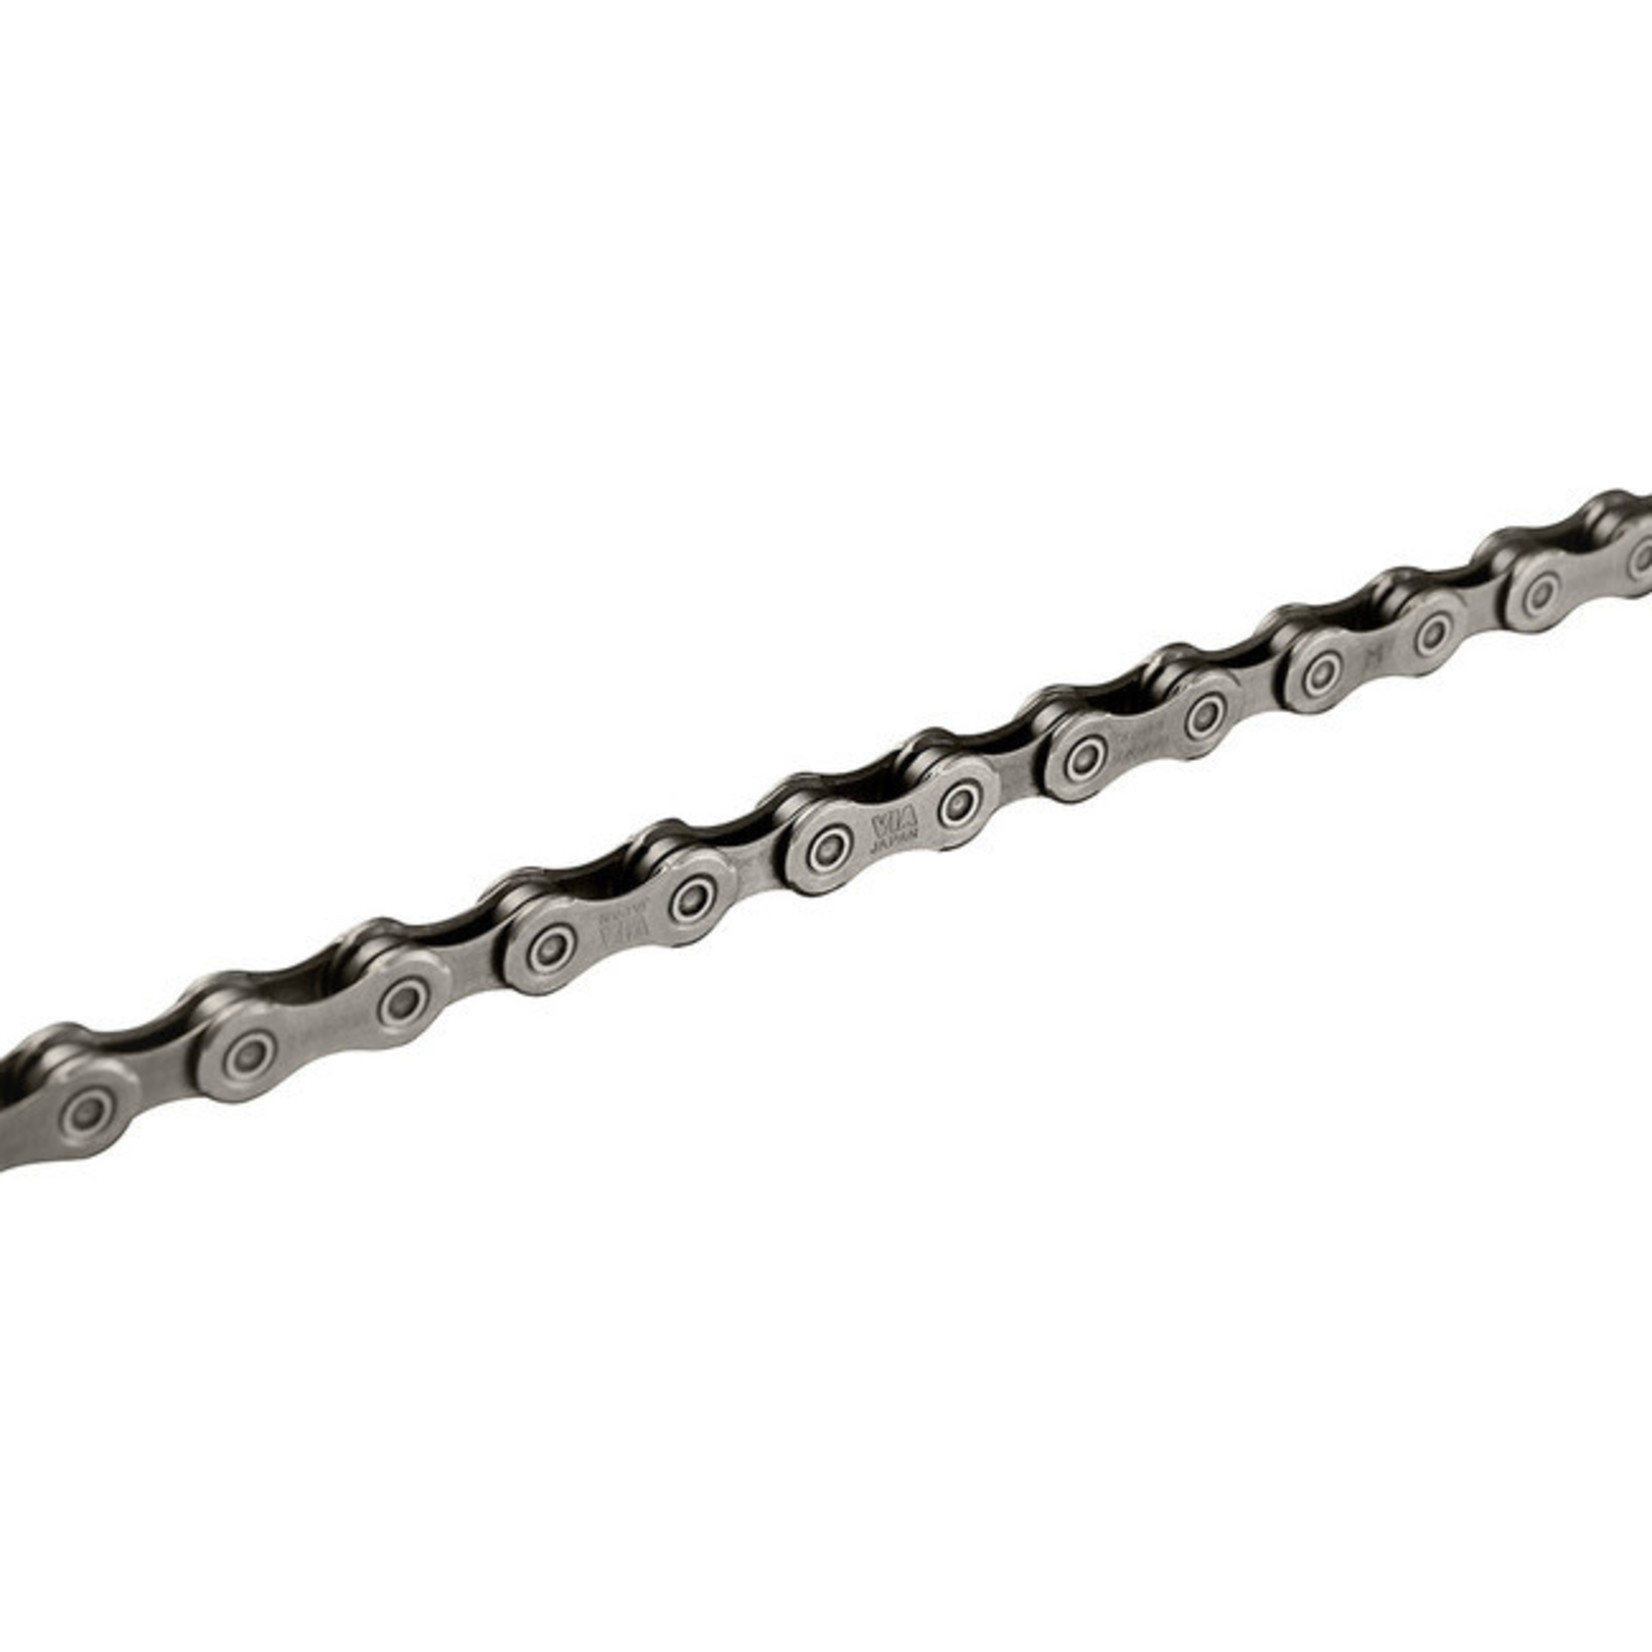 Shimano CHAIN, CN-HG701-11, FOR 11-SPEED (ROAD/MTB/E-BIKE COMPATIBLE), 126 LINKS (W/QUICK LINK, SM-CN900-11)